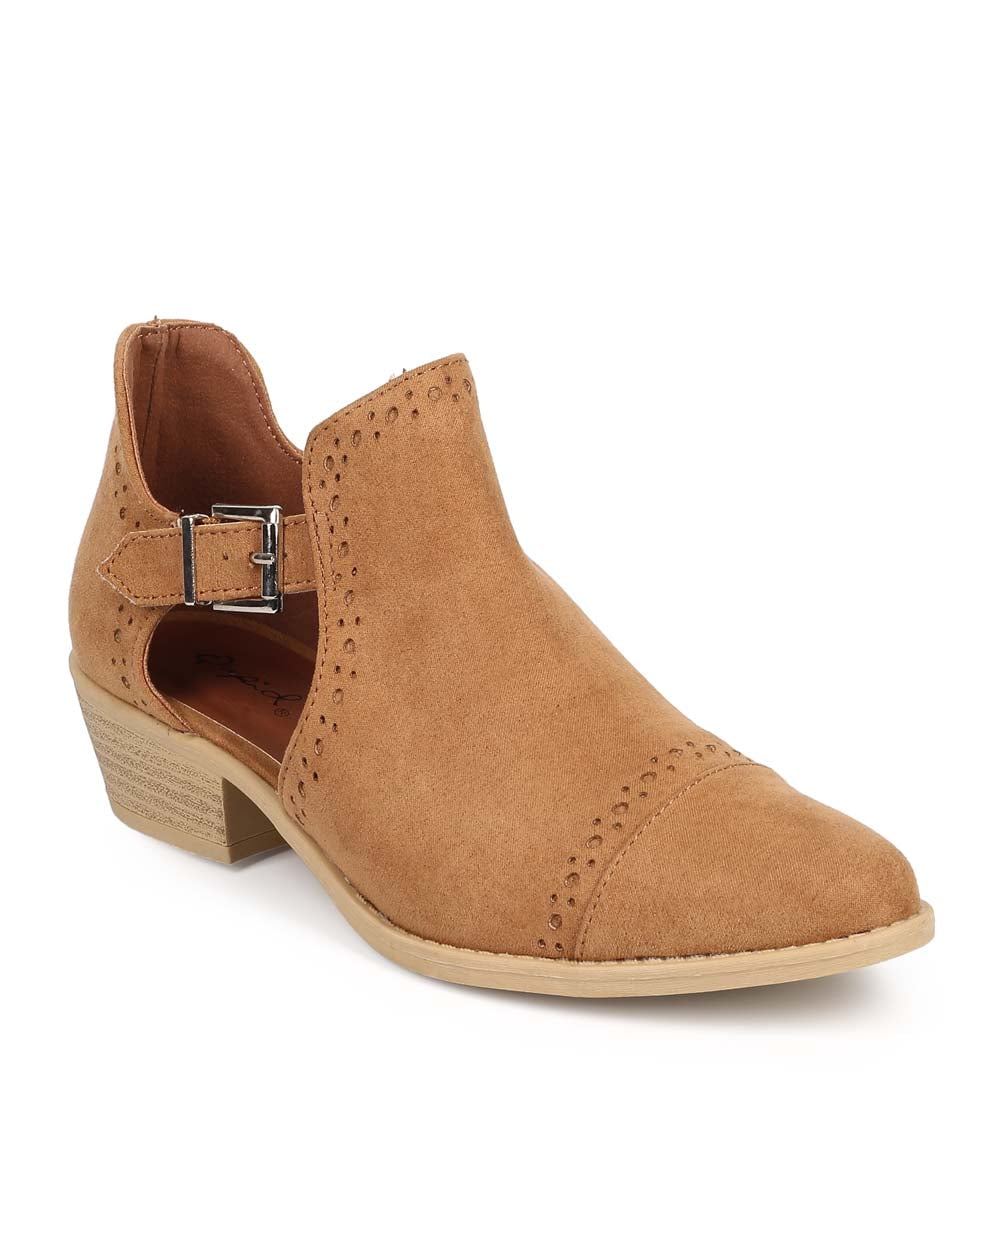 qupid cut out bootie